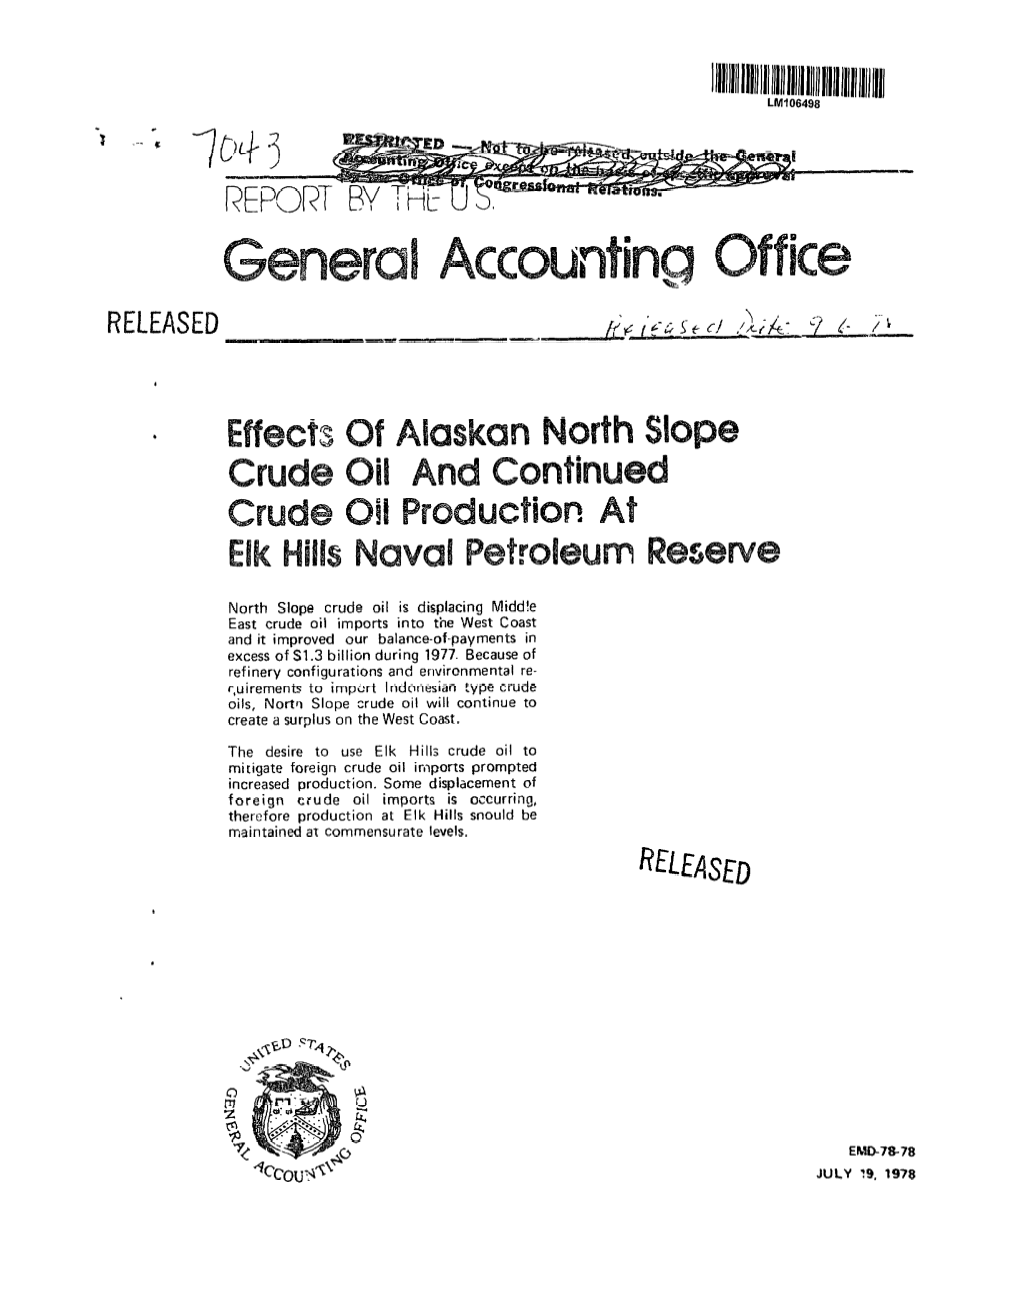 EMD-78-78 Effects of Alaskan North Slope Crude Oil and Continued